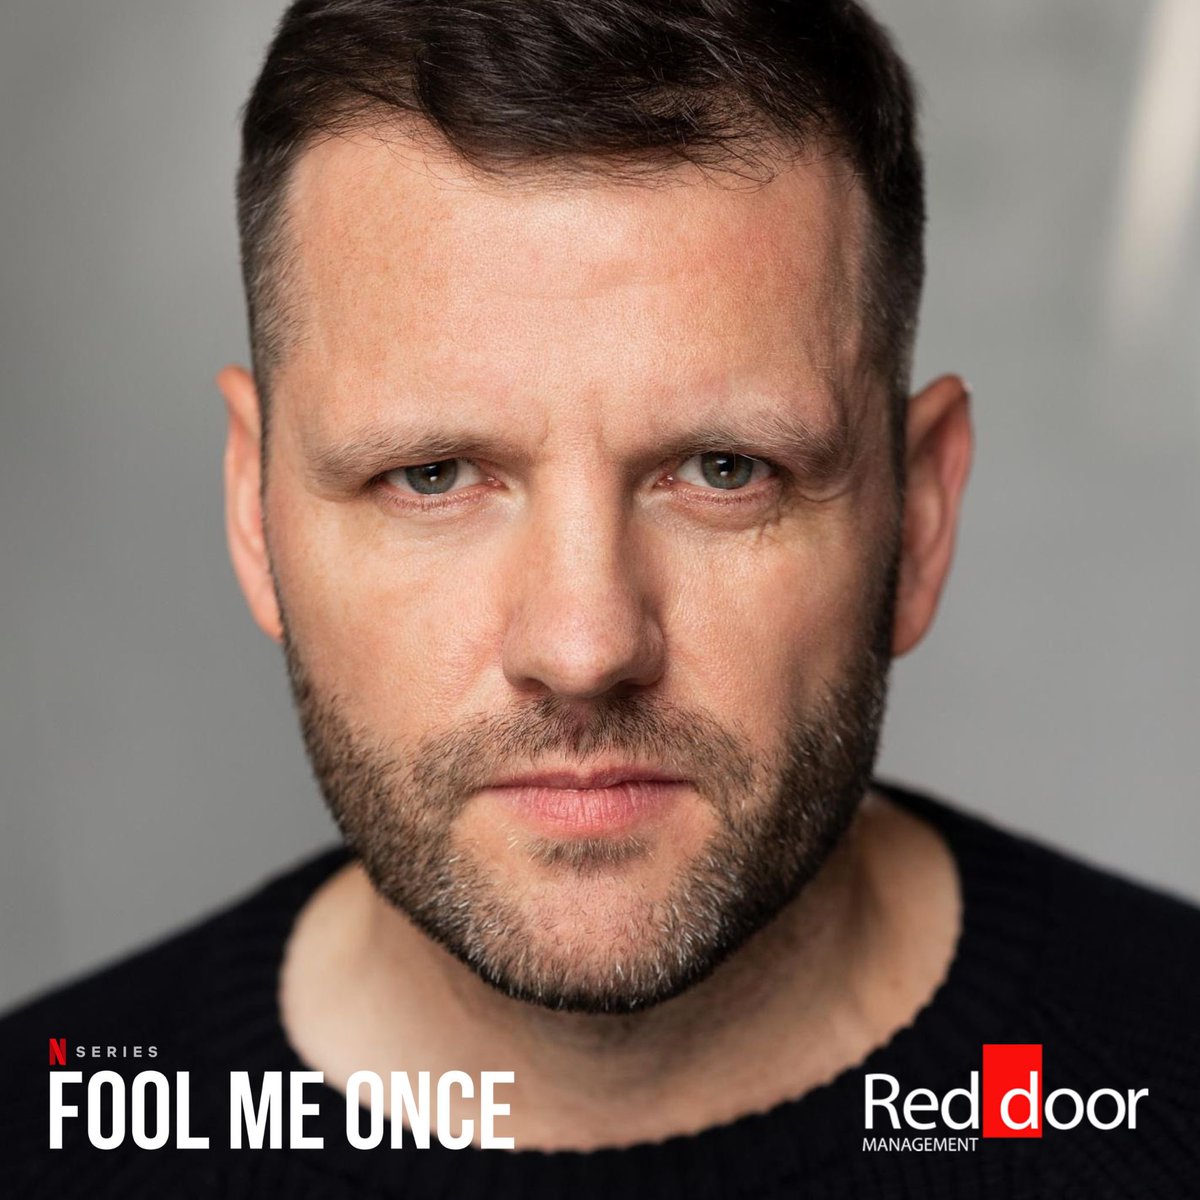 Fool Me Once is out now on @netflix worldwide 

Don’t miss the new crime thriller from @HarlanCoben starring Michelle Keegan, Adeel Akhtar, Joanna Lumley and Richard Armitage.

Featuring Red Door’s PAUL BRIDGES as Tony 💫

#foolmeonce #netflix #reddoormanagement